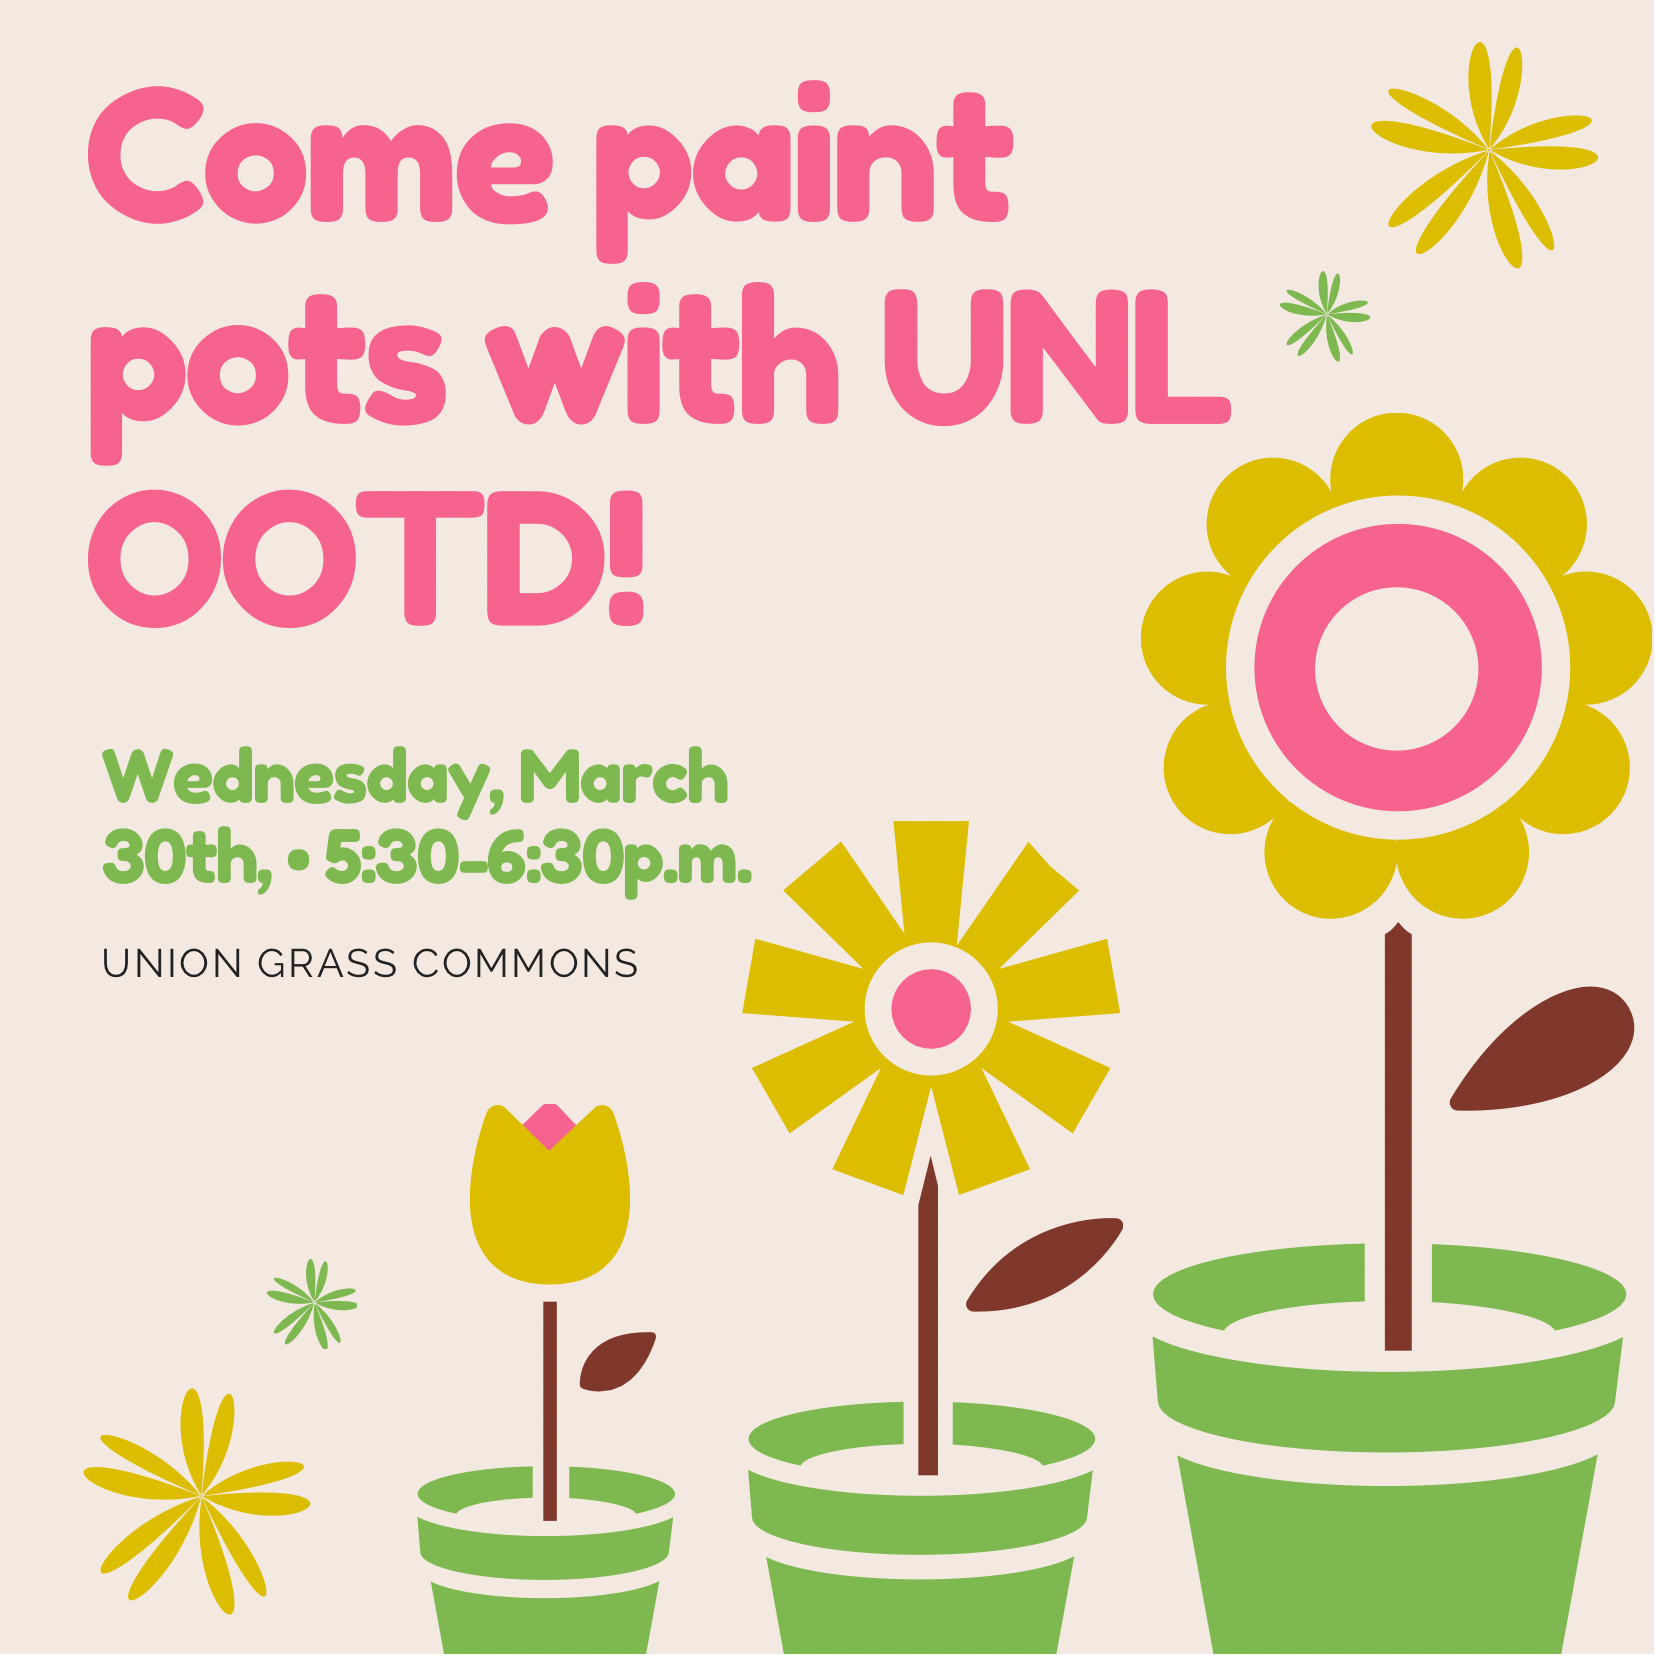 From 5:30 to 6:30 p.m. March 30 in Nebraska Union greenspace, join UNL Out of the Darkness to paint pots and plant sunflower seeds.